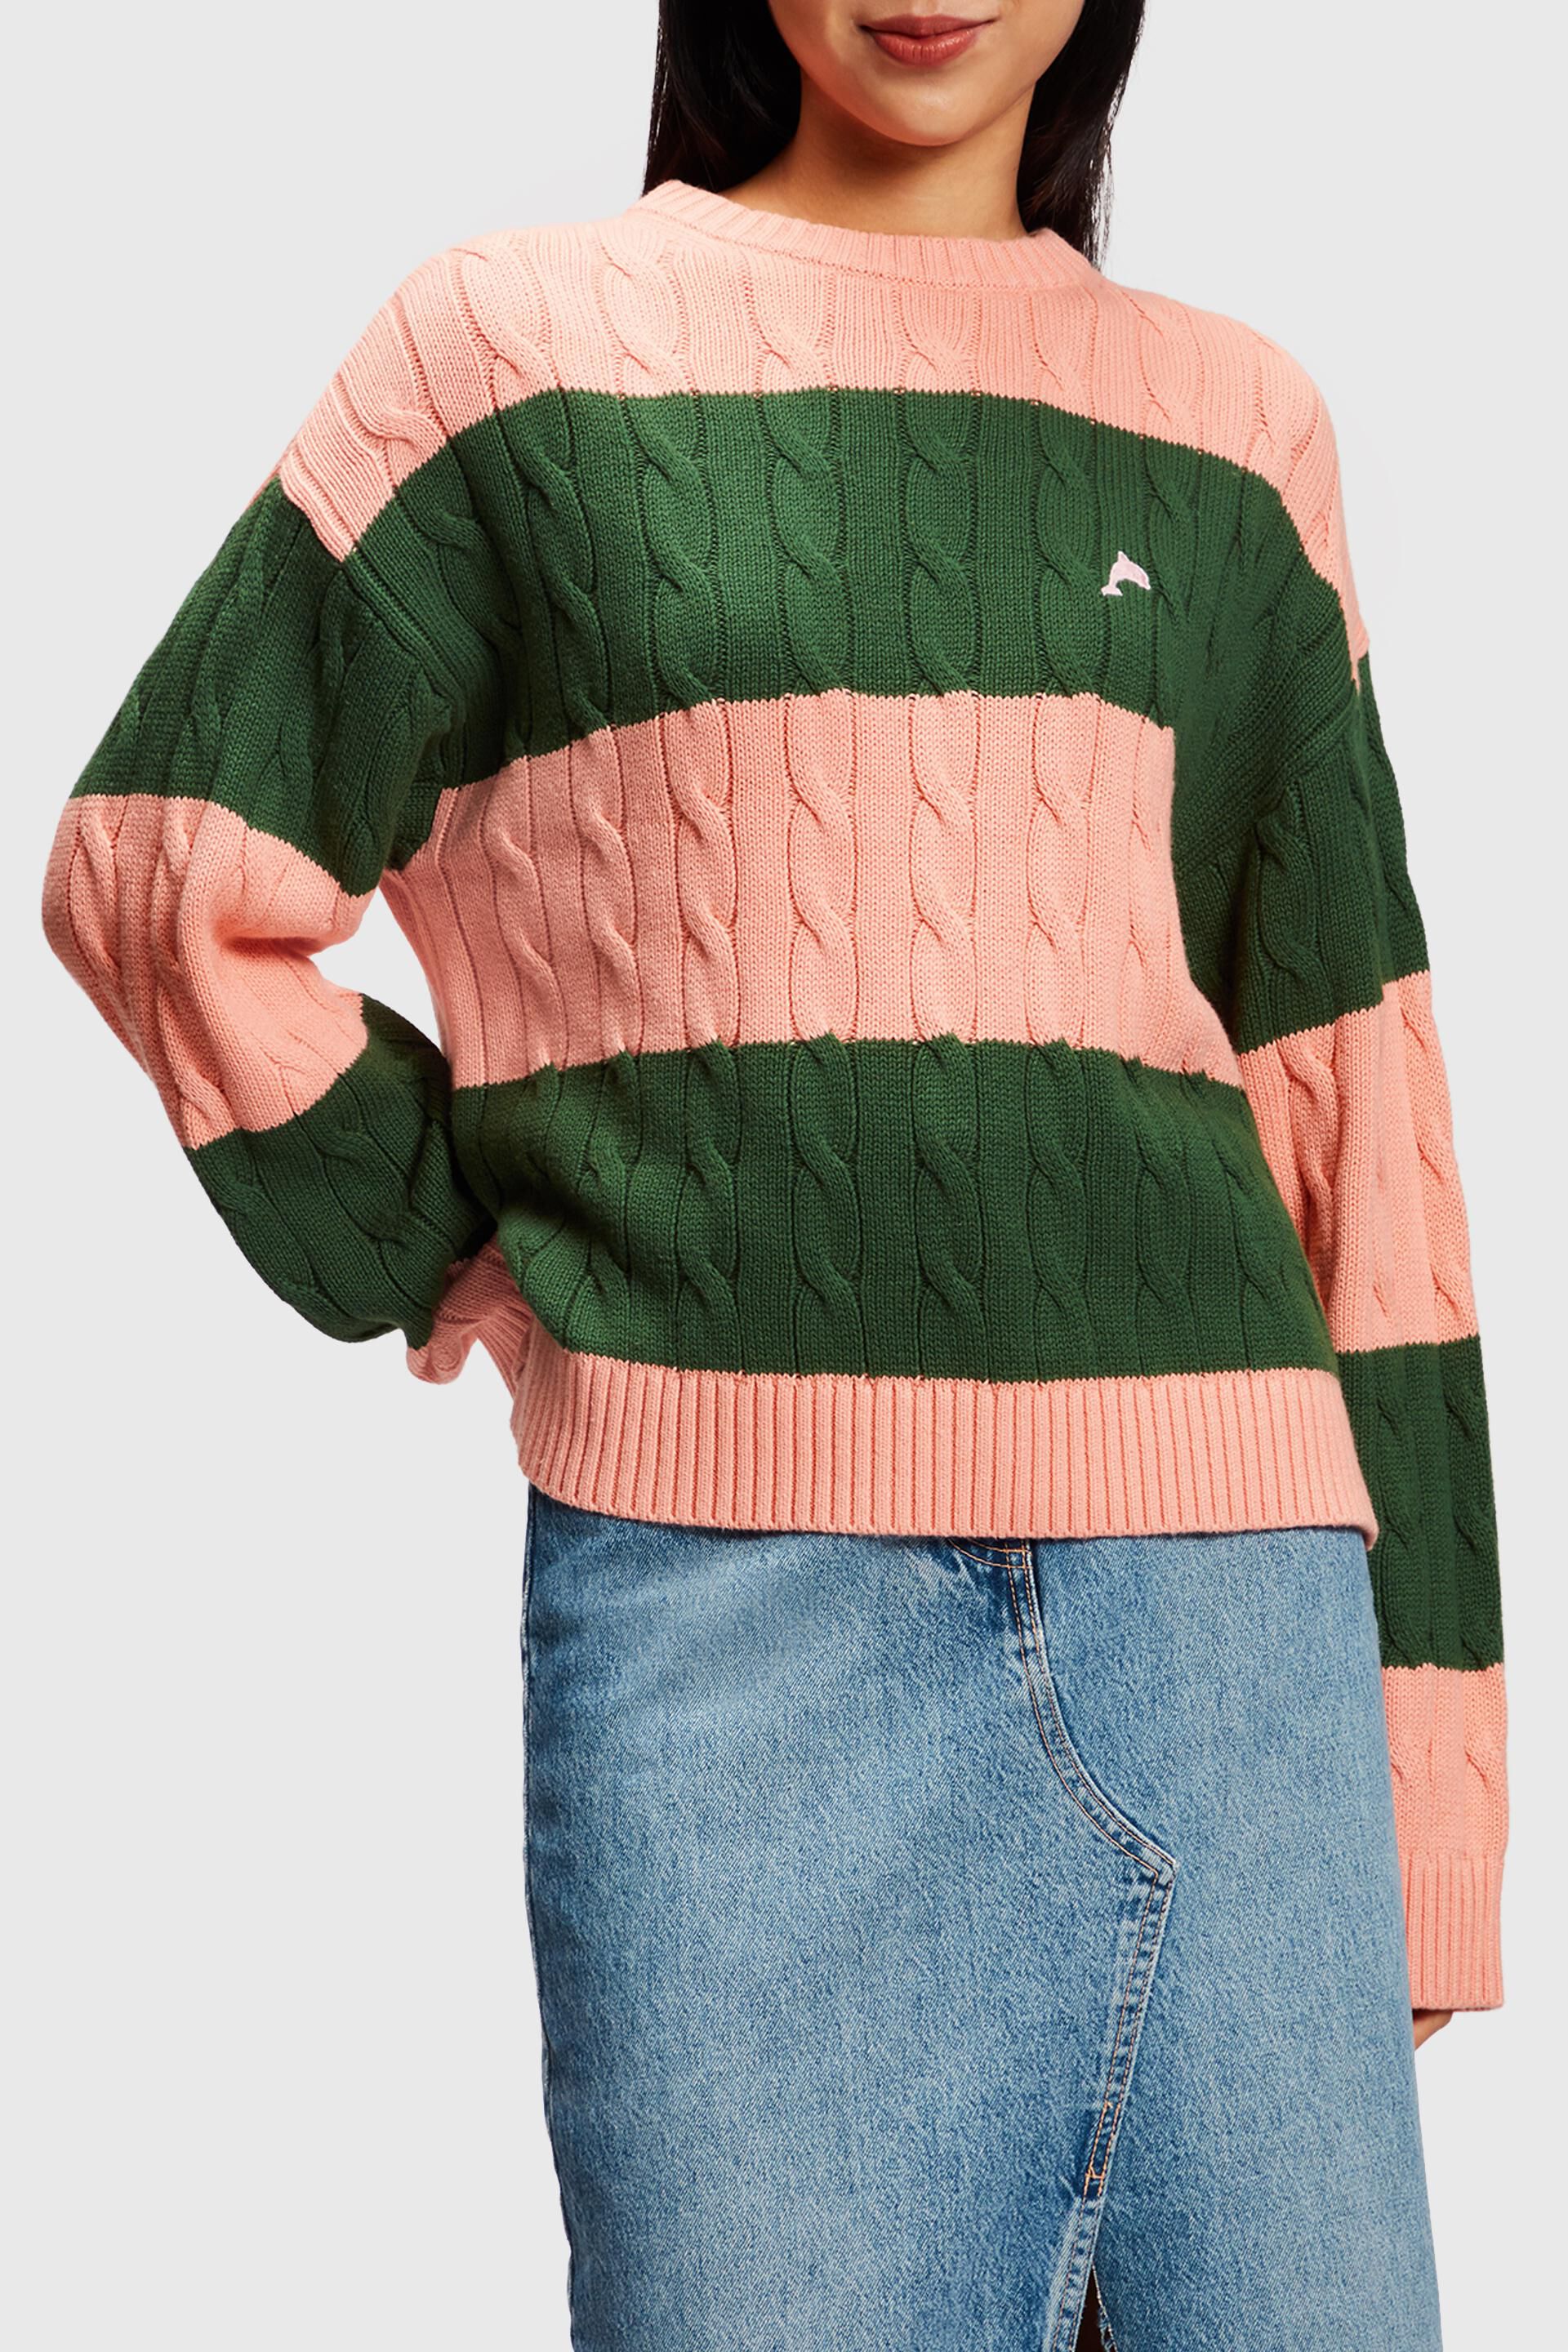 Esprit cable sweater knit Striped